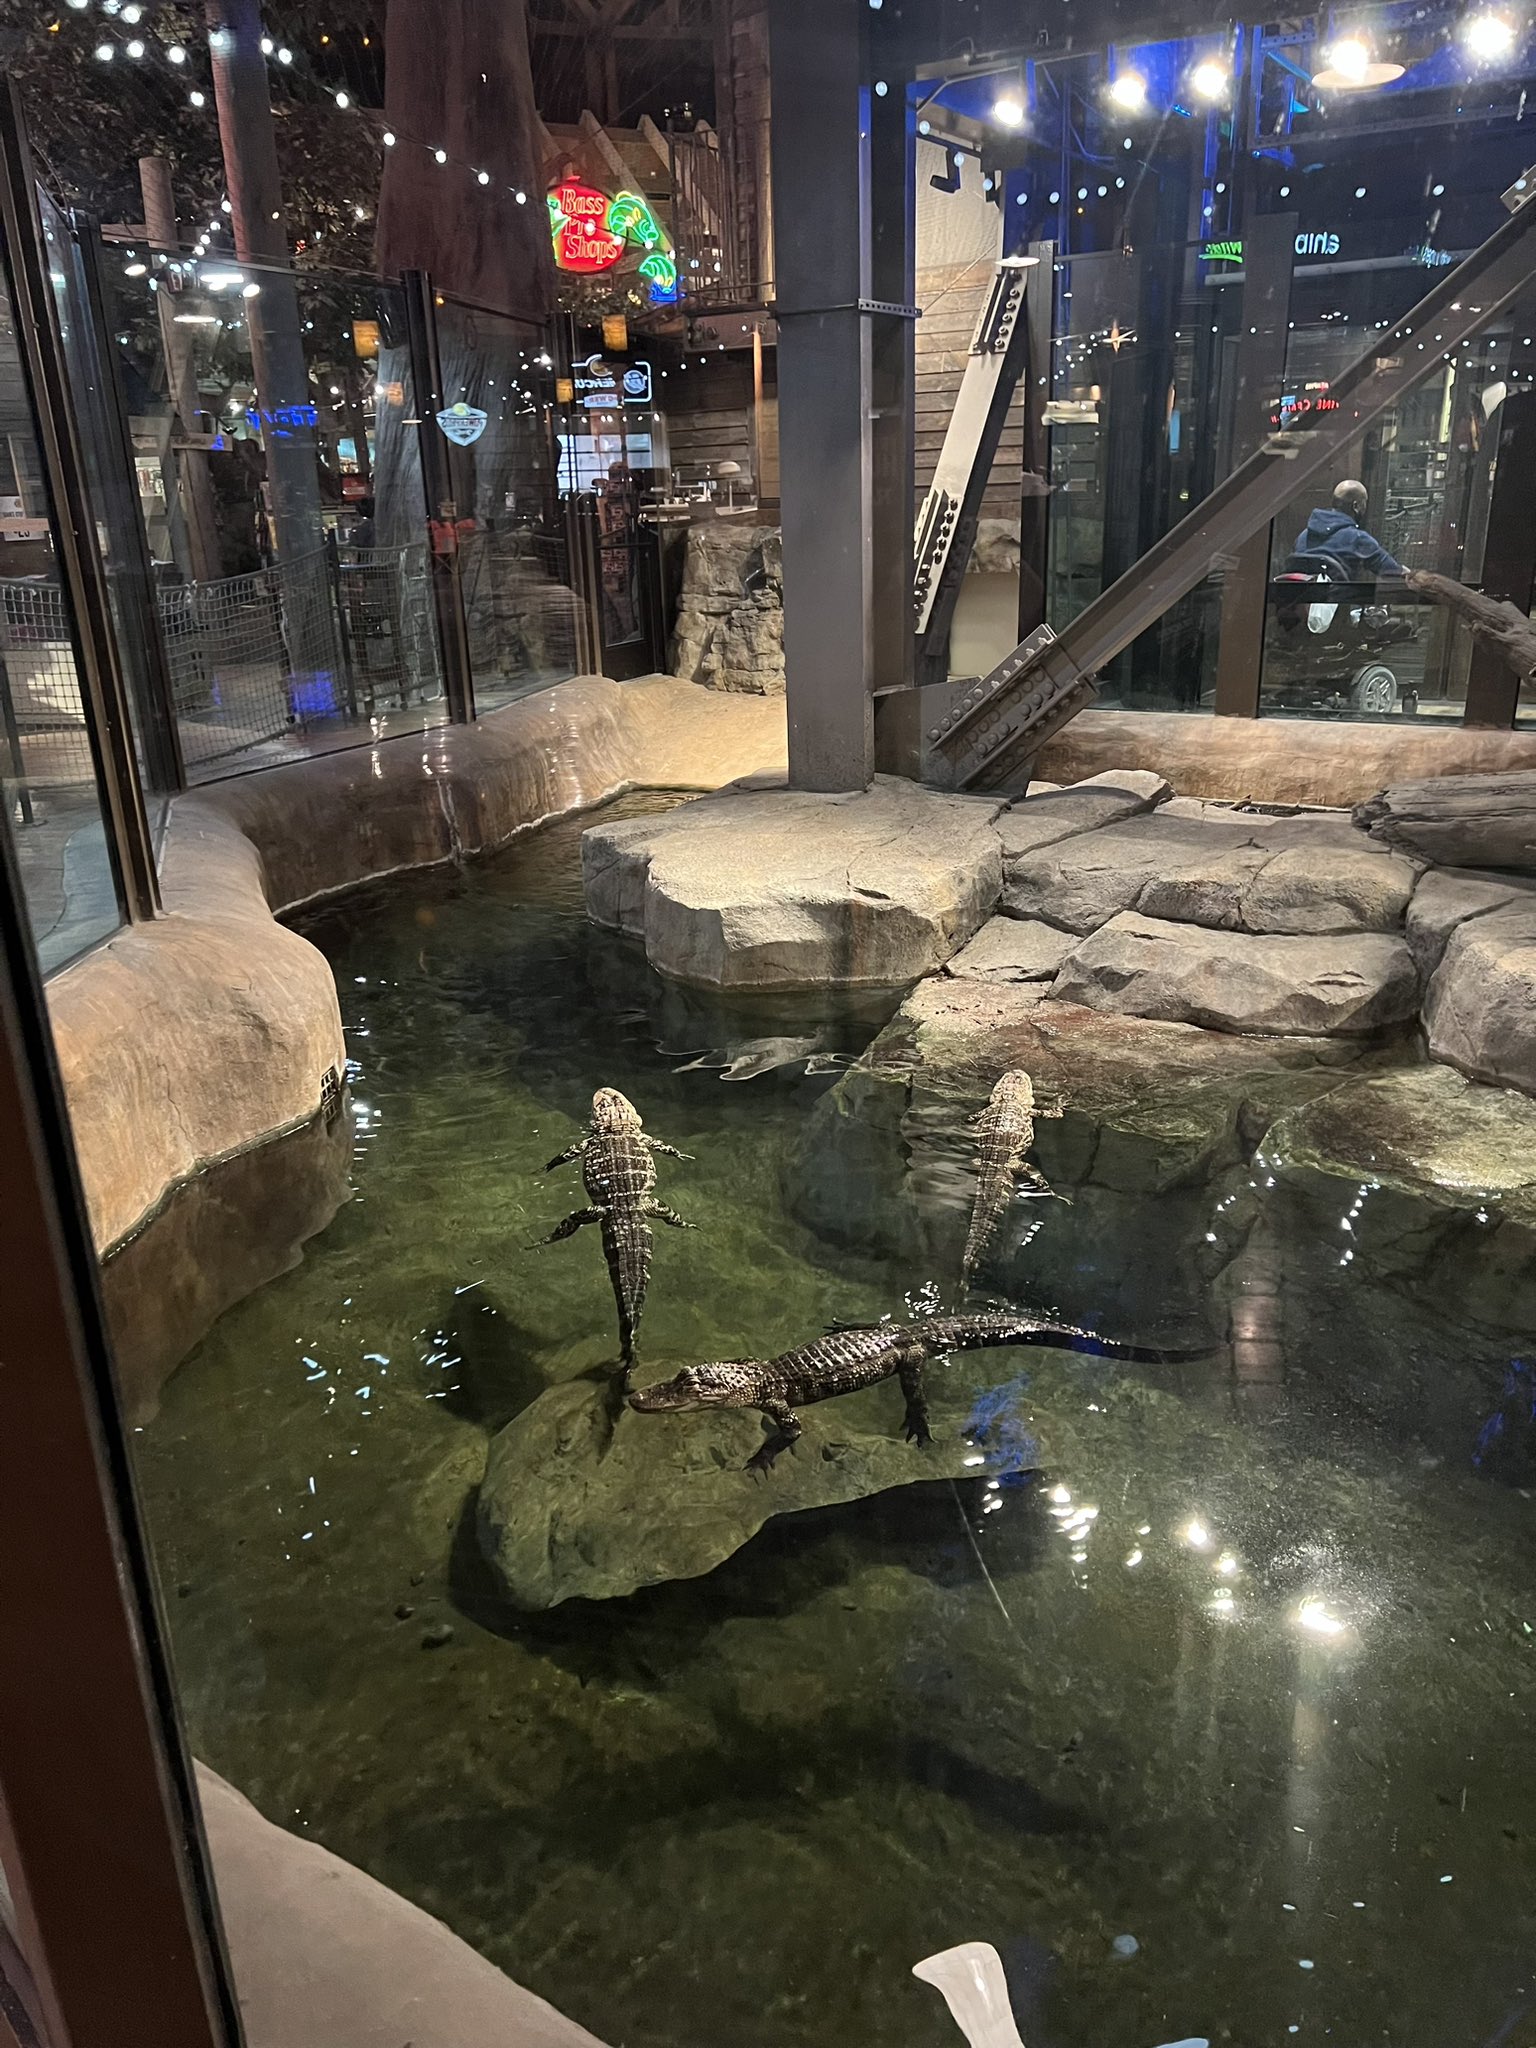 Ant on X: Went to Bass Pro downtown for the first time today: 1